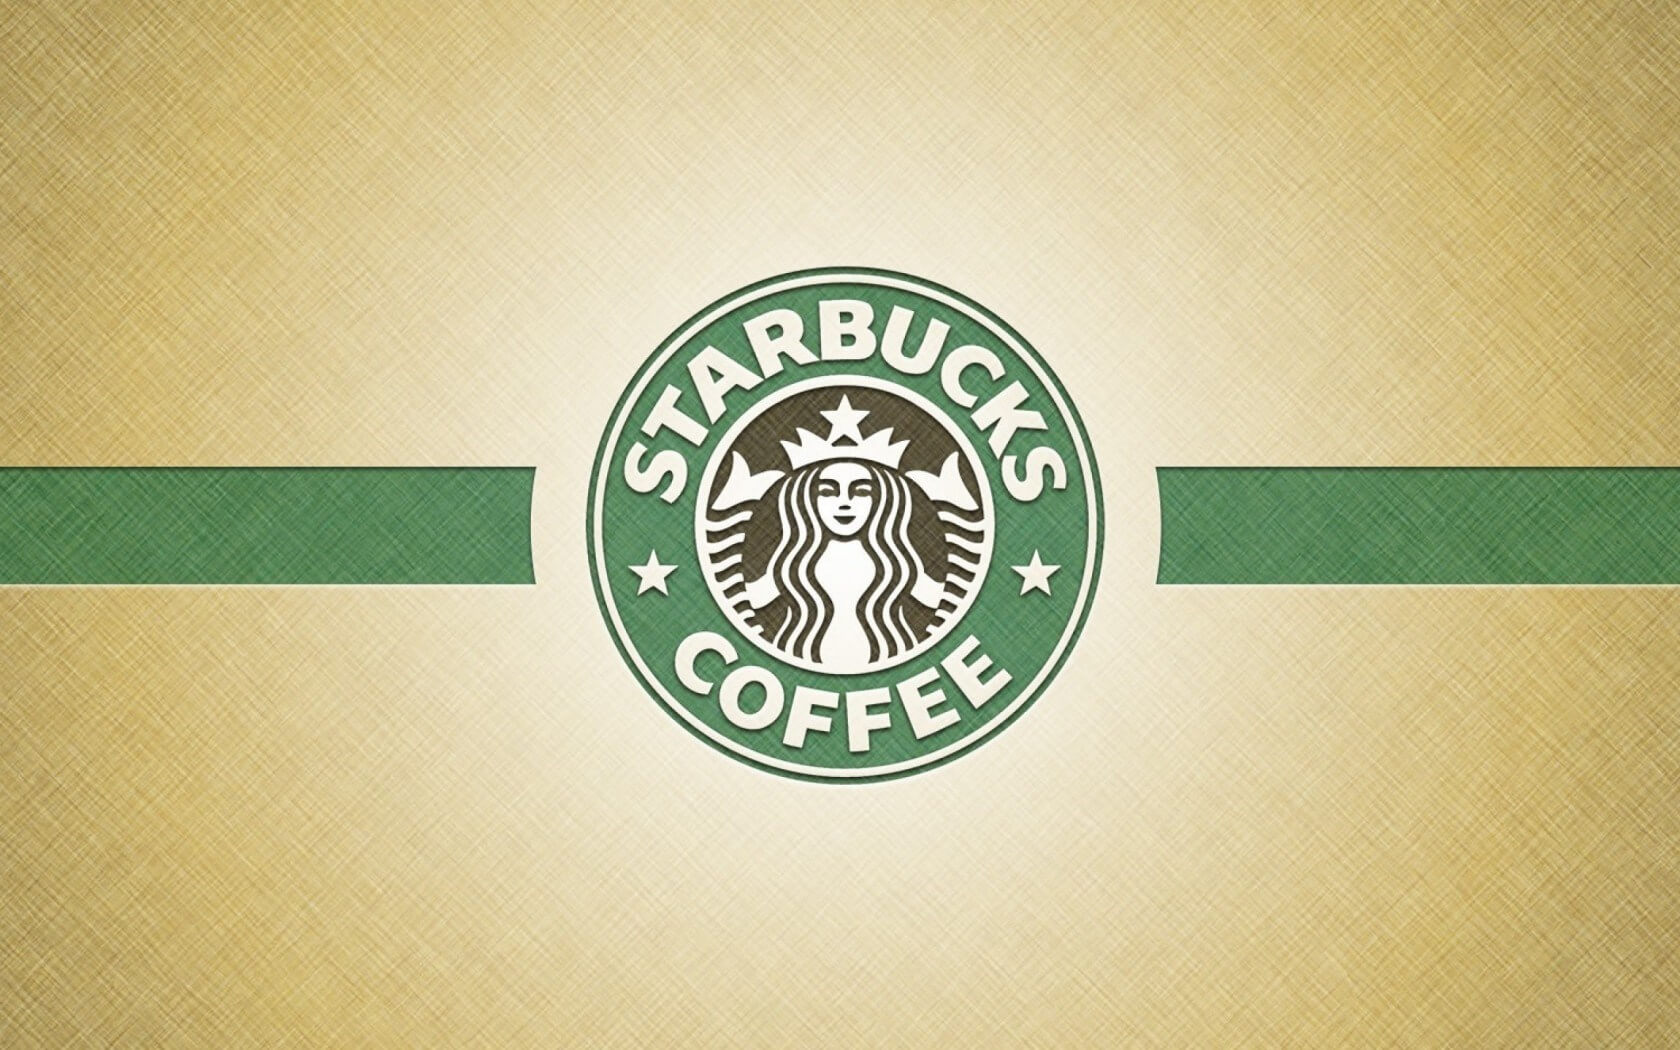 Starbucks Ppt Background - Powerpoint Backgrounds For Free With Starbucks Powerpoint Template